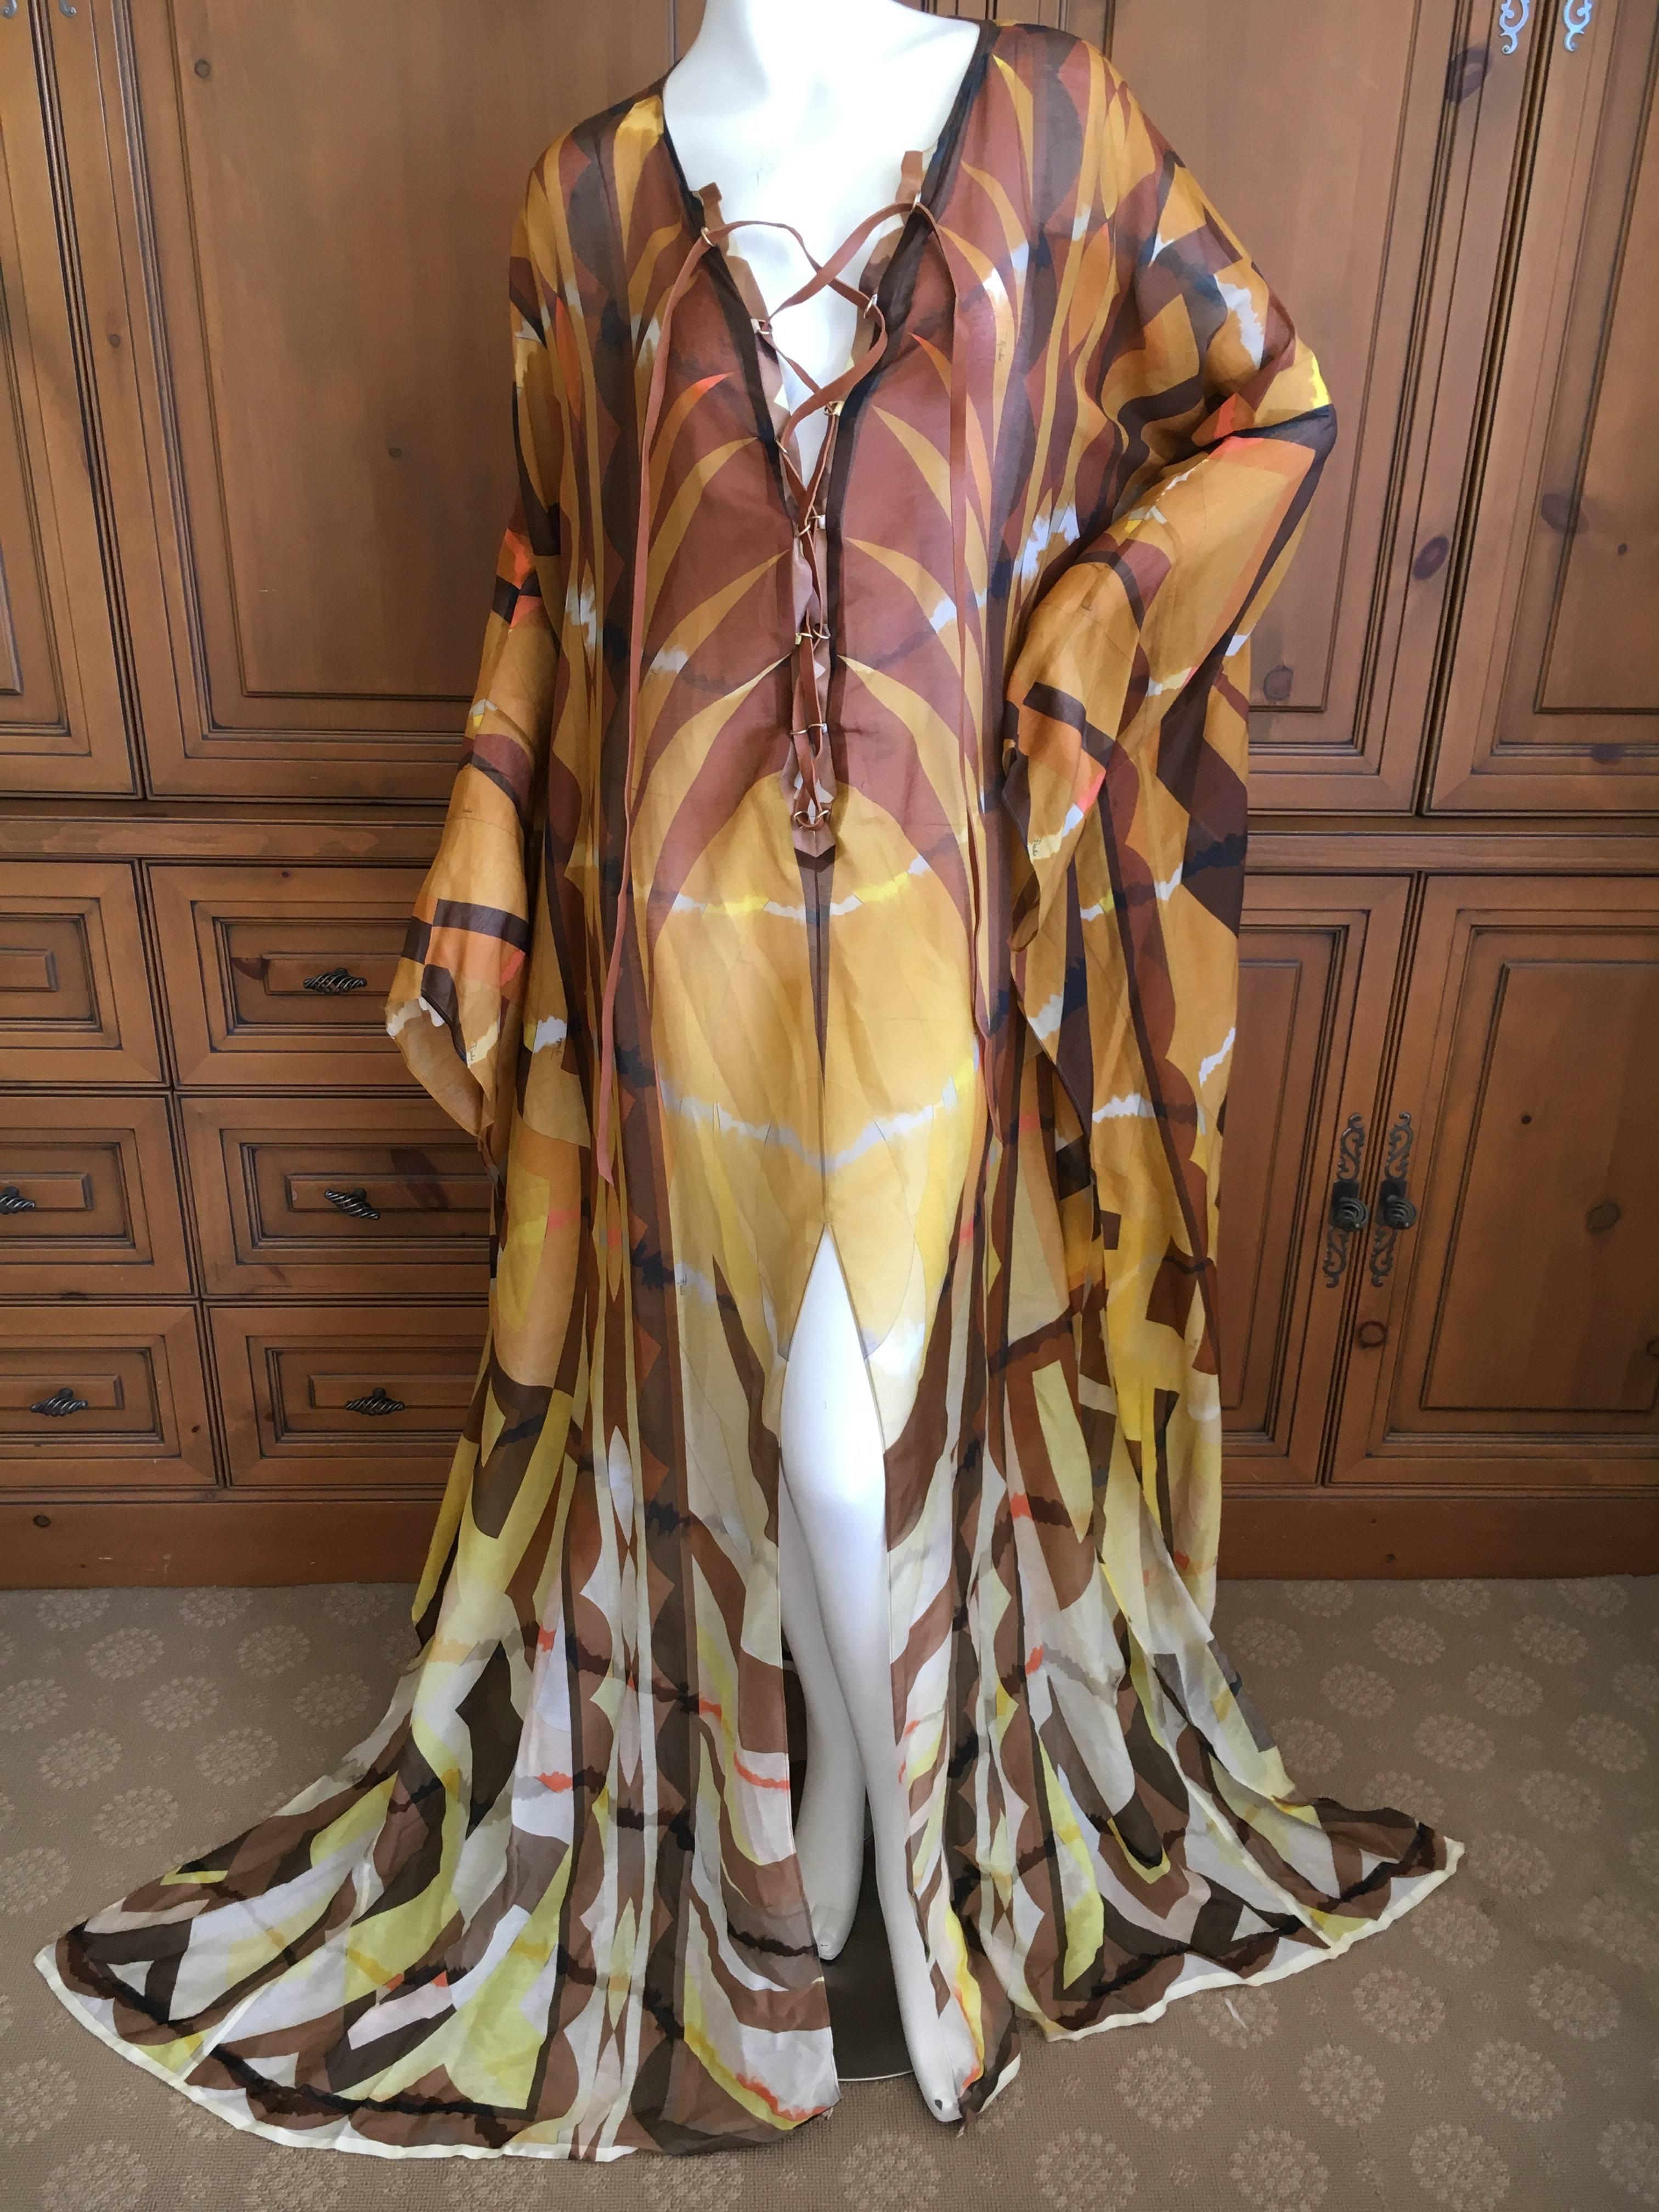 Brown Emilio Pucci Sheer Patterned Caftan with Leather Lace Up Straps New with Tags For Sale